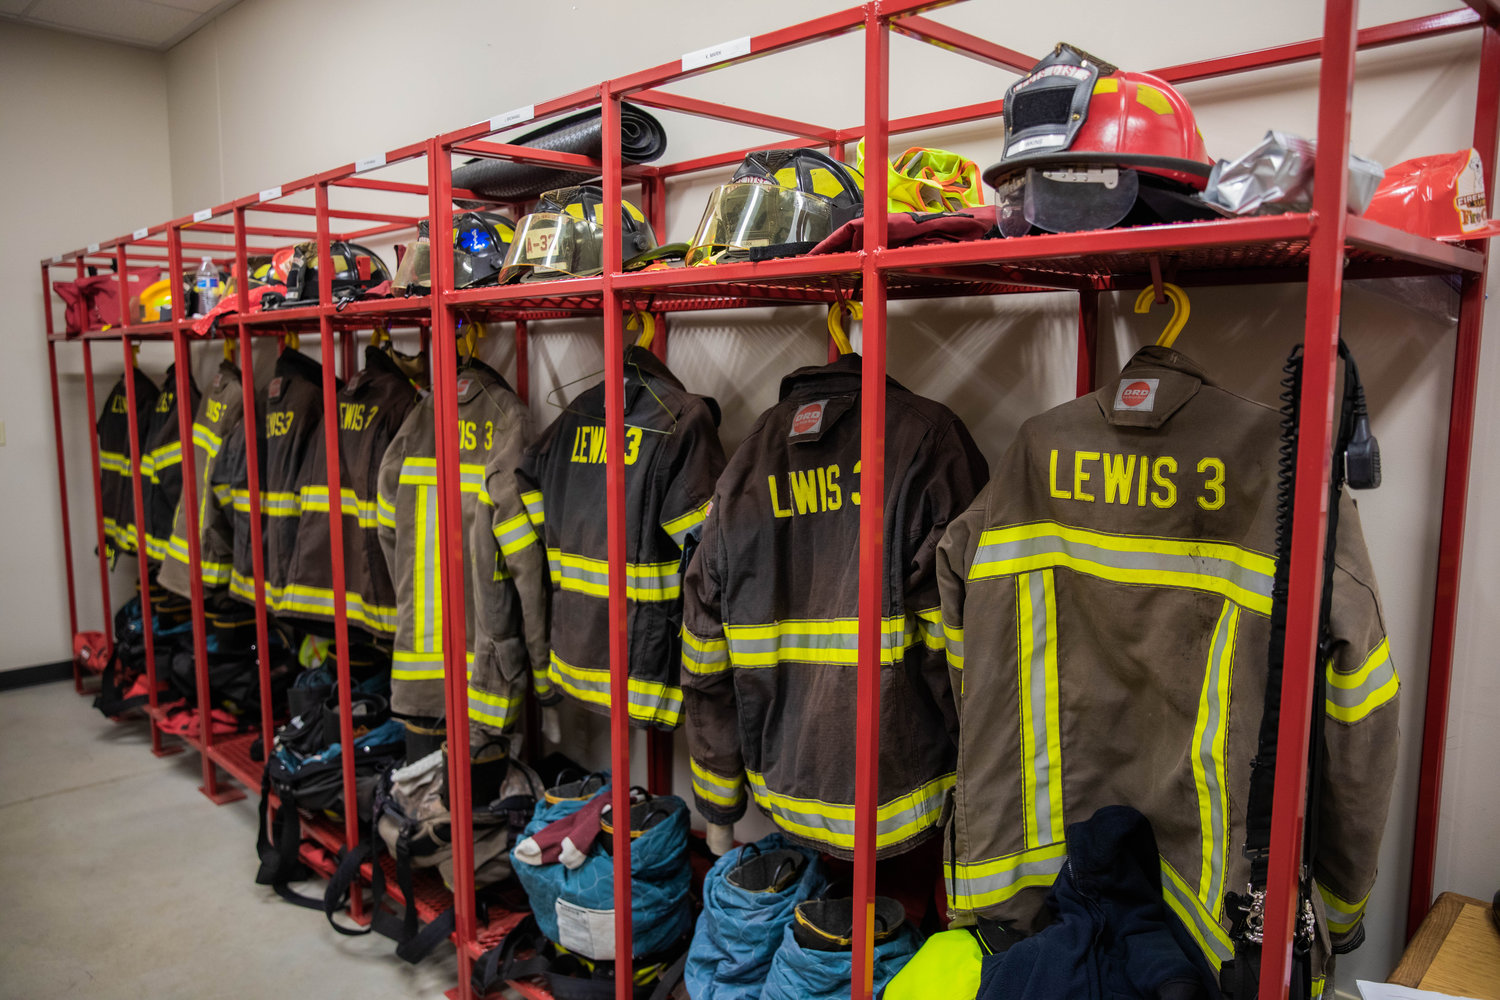 Gear sits on display Monday night at the Lewis County Fire District 3 building in Mossyrock.